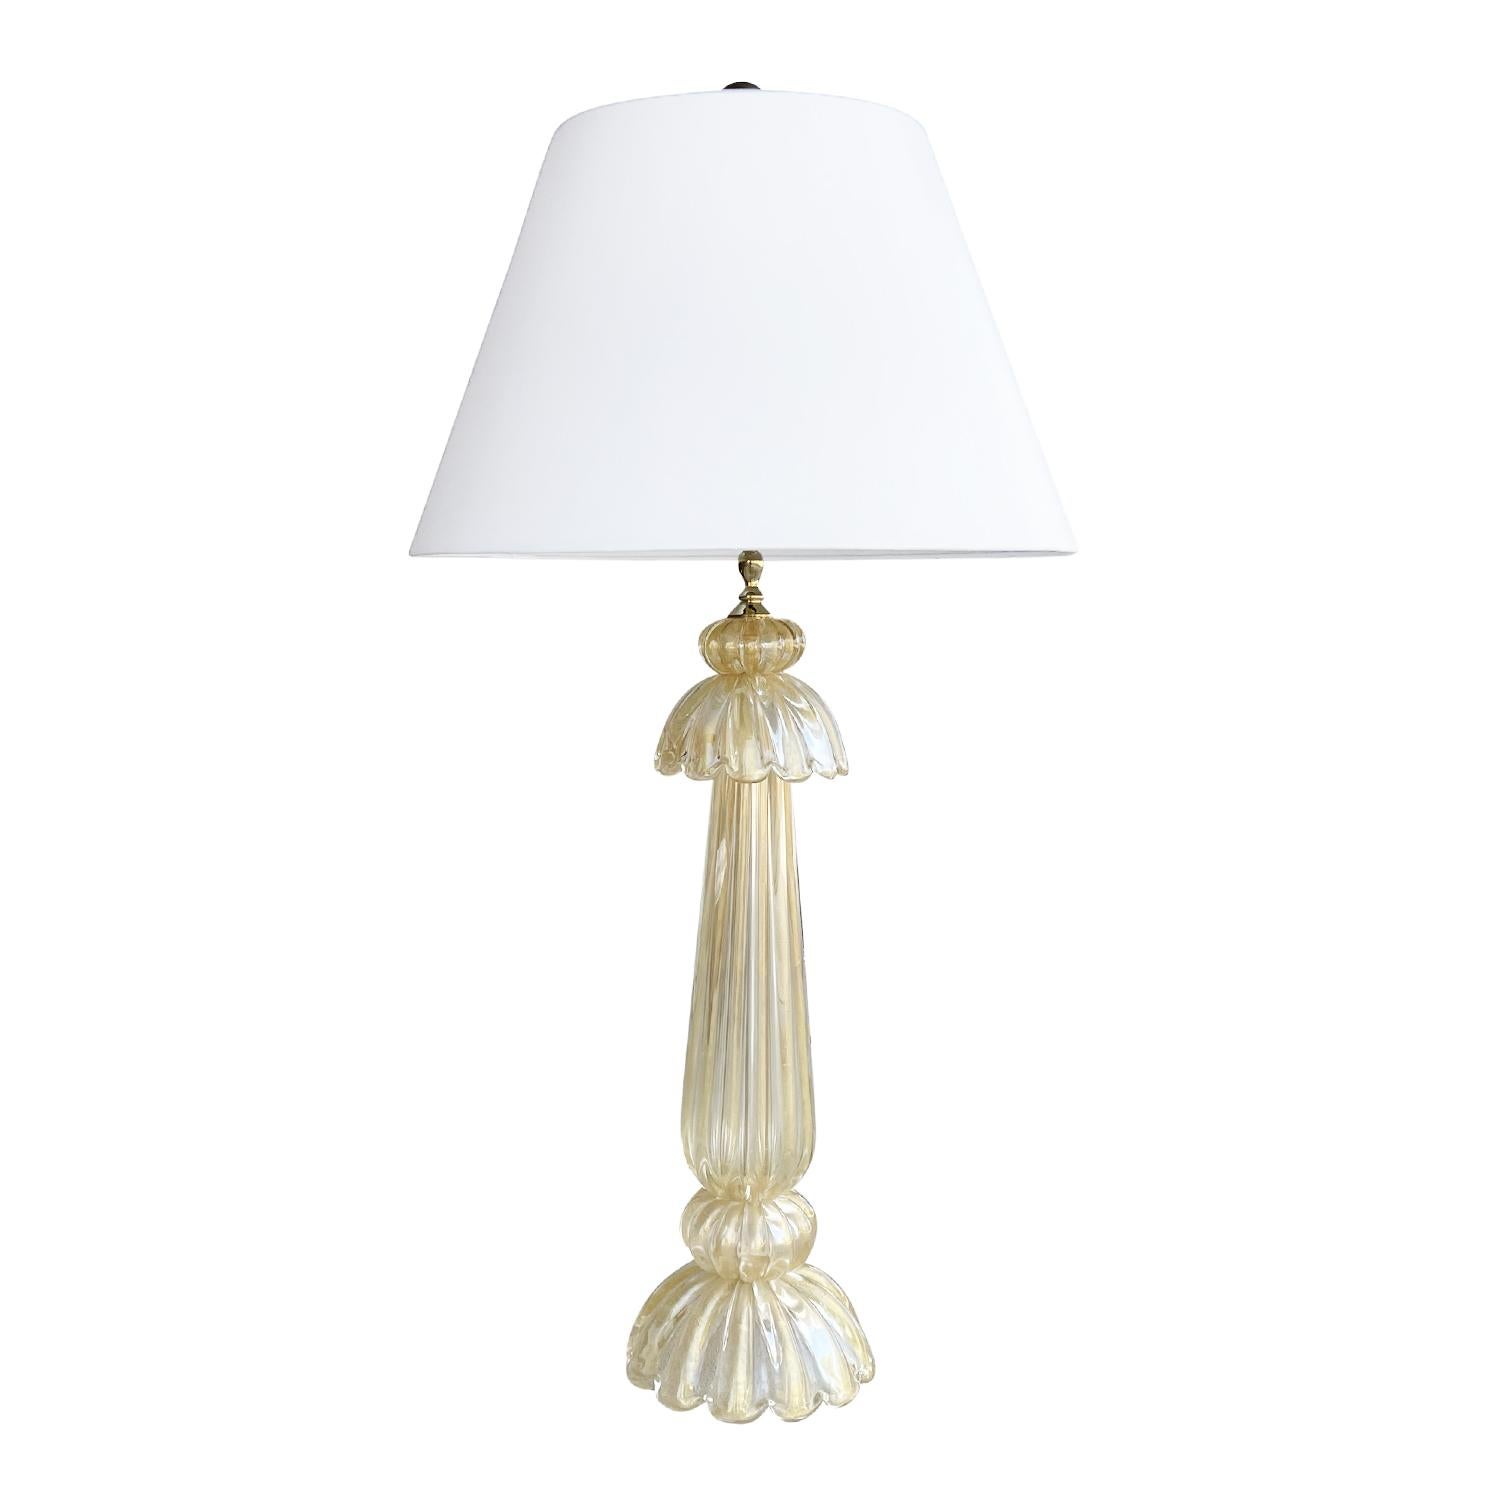 A tall, vintage Mid-Century Modern Italian table lamp with a new round white shade, made of hand blown frosted Murano glass Oro Sommerso, produced by Barovier & Toso in good condition. The round base of the desk light supports the long twisting